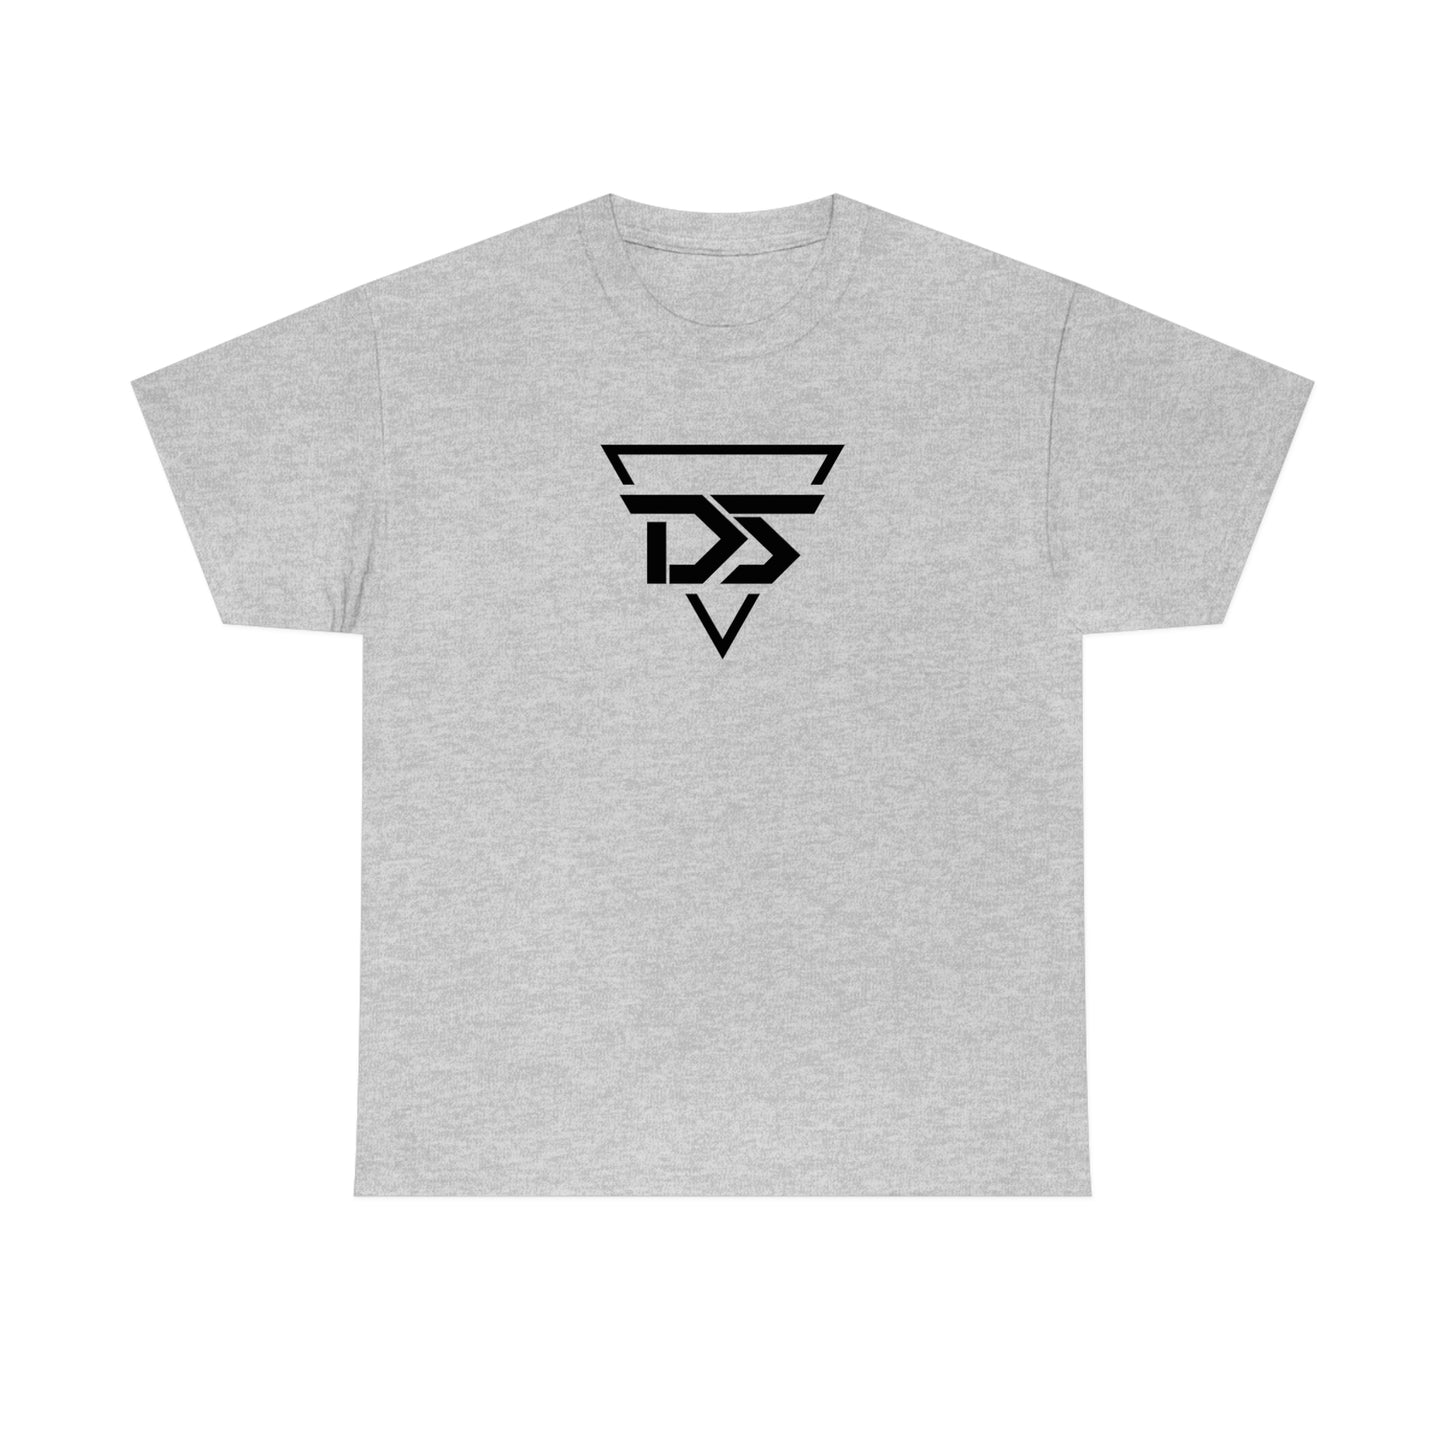 Darrius Sample "DS" Double Sided Tee